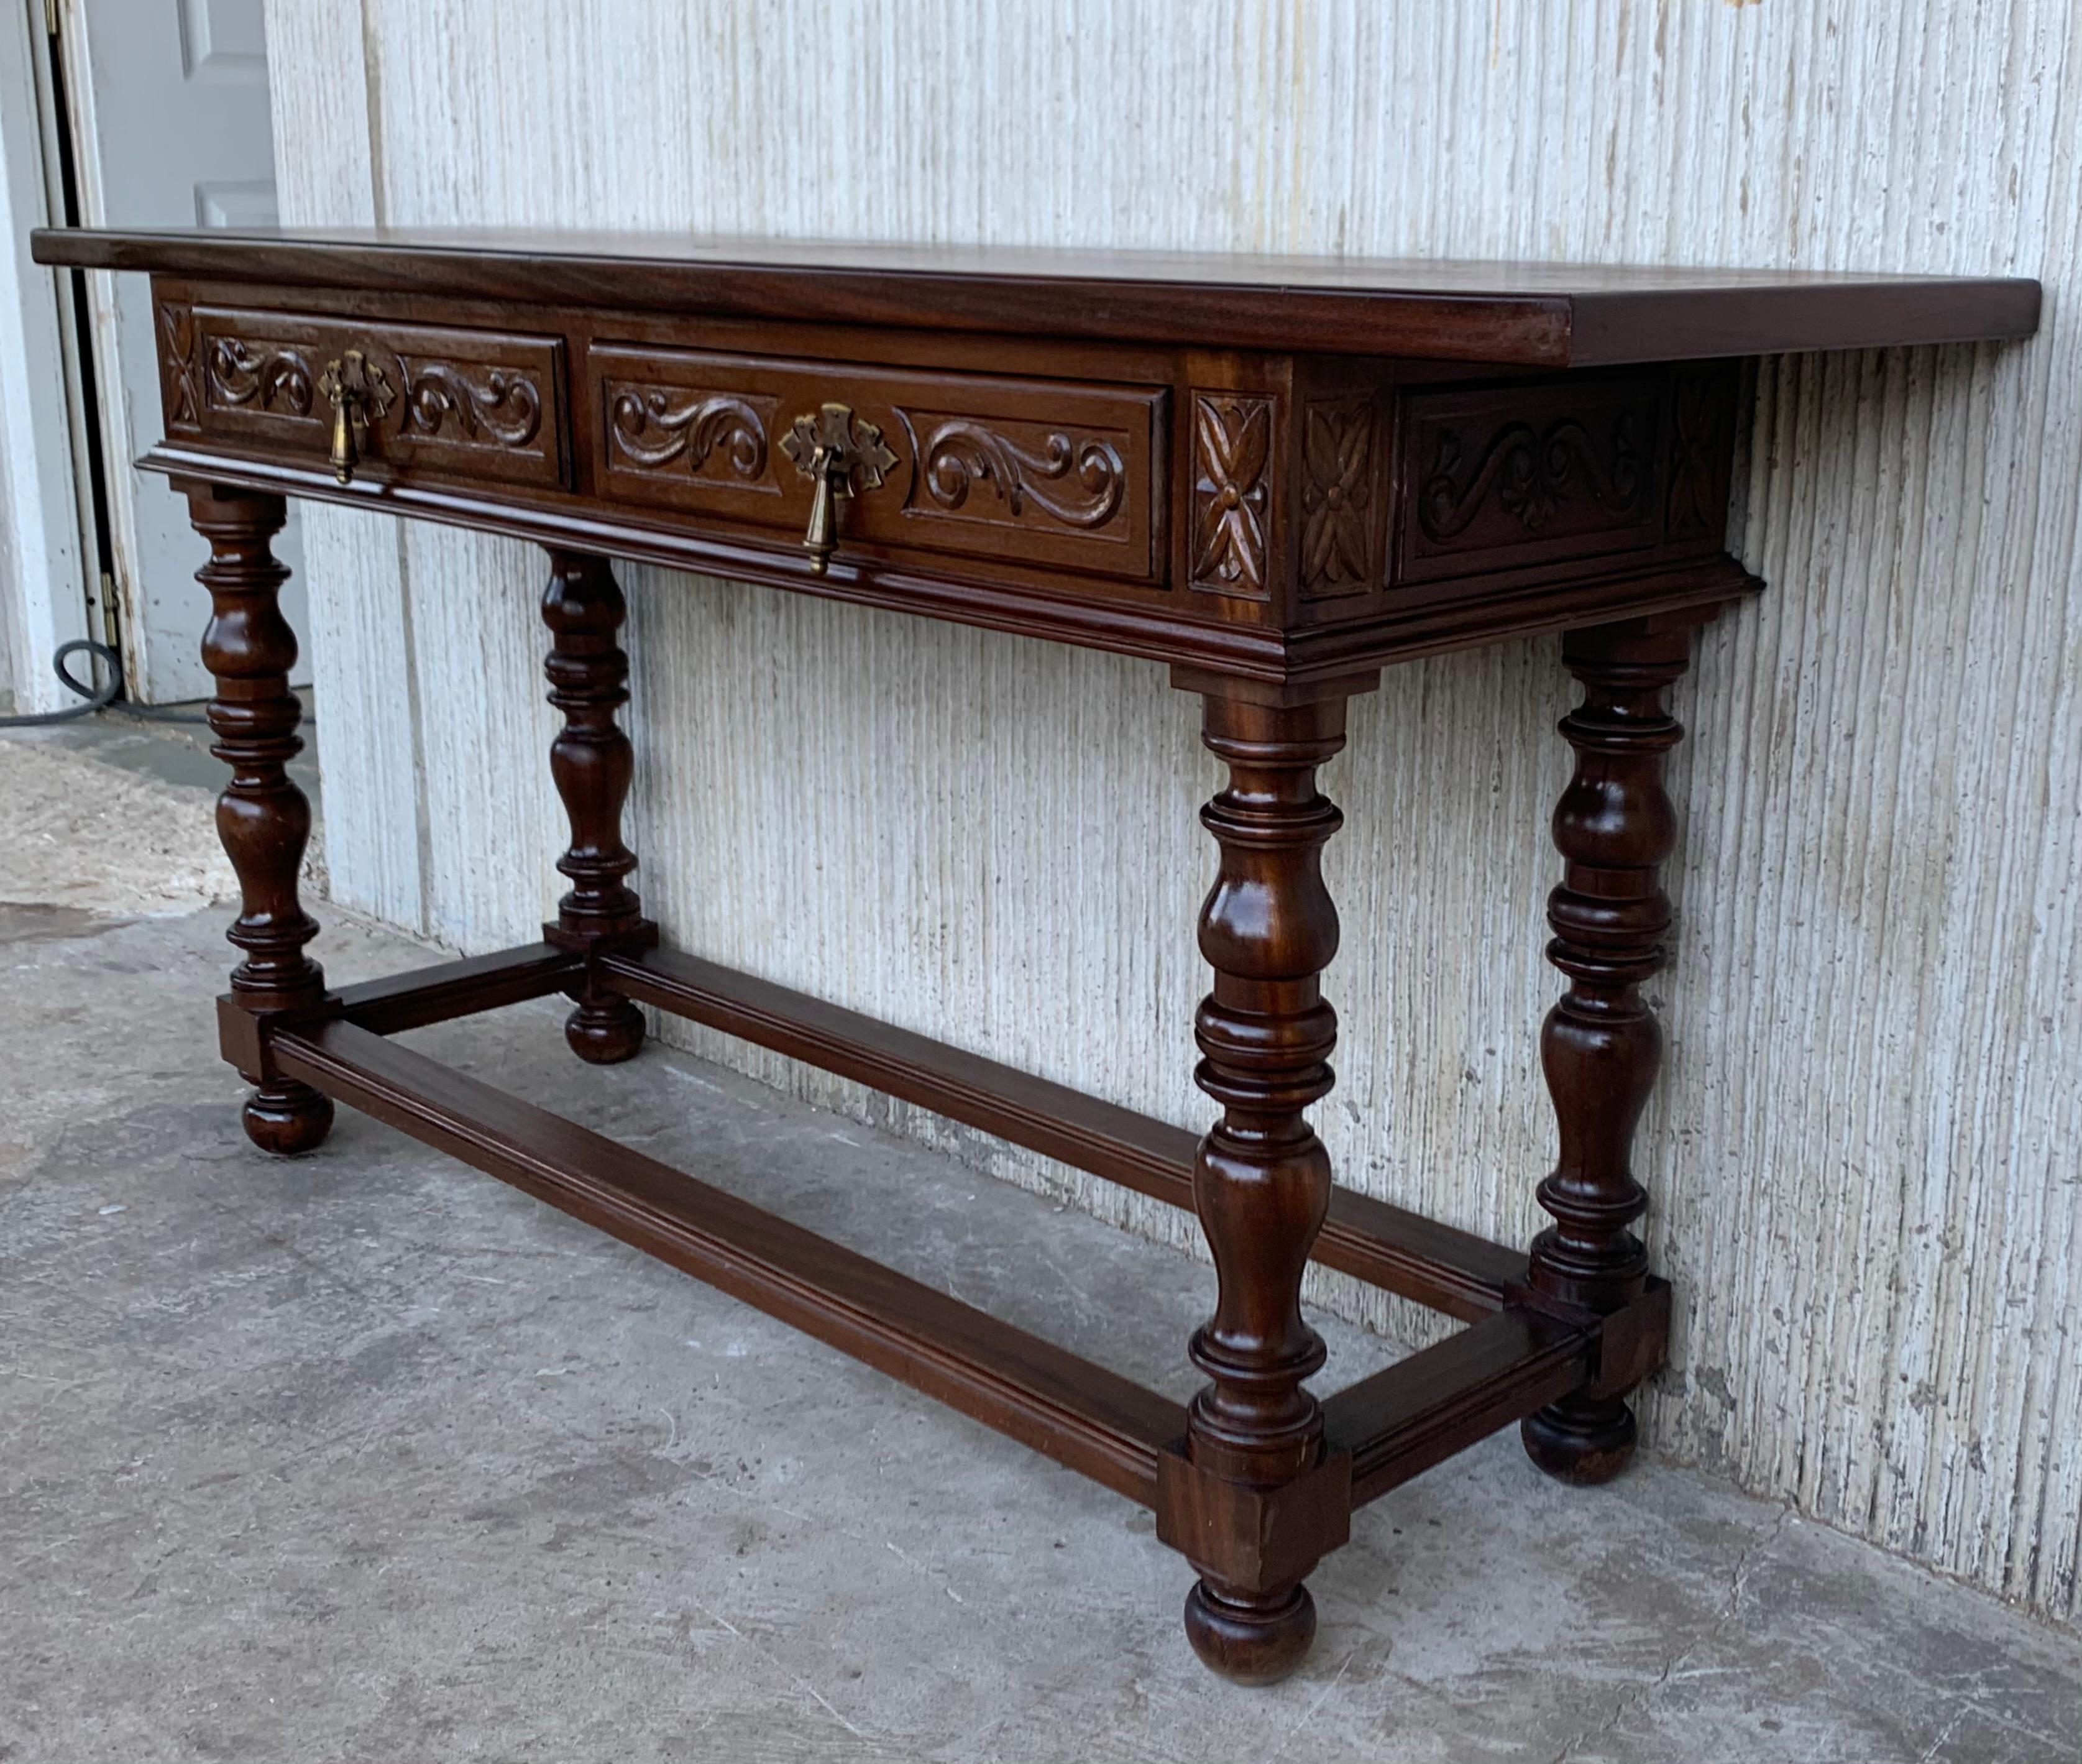 Iron 20th Century Spanish Tuscan Console Table with Two Drawers and Turned Legs